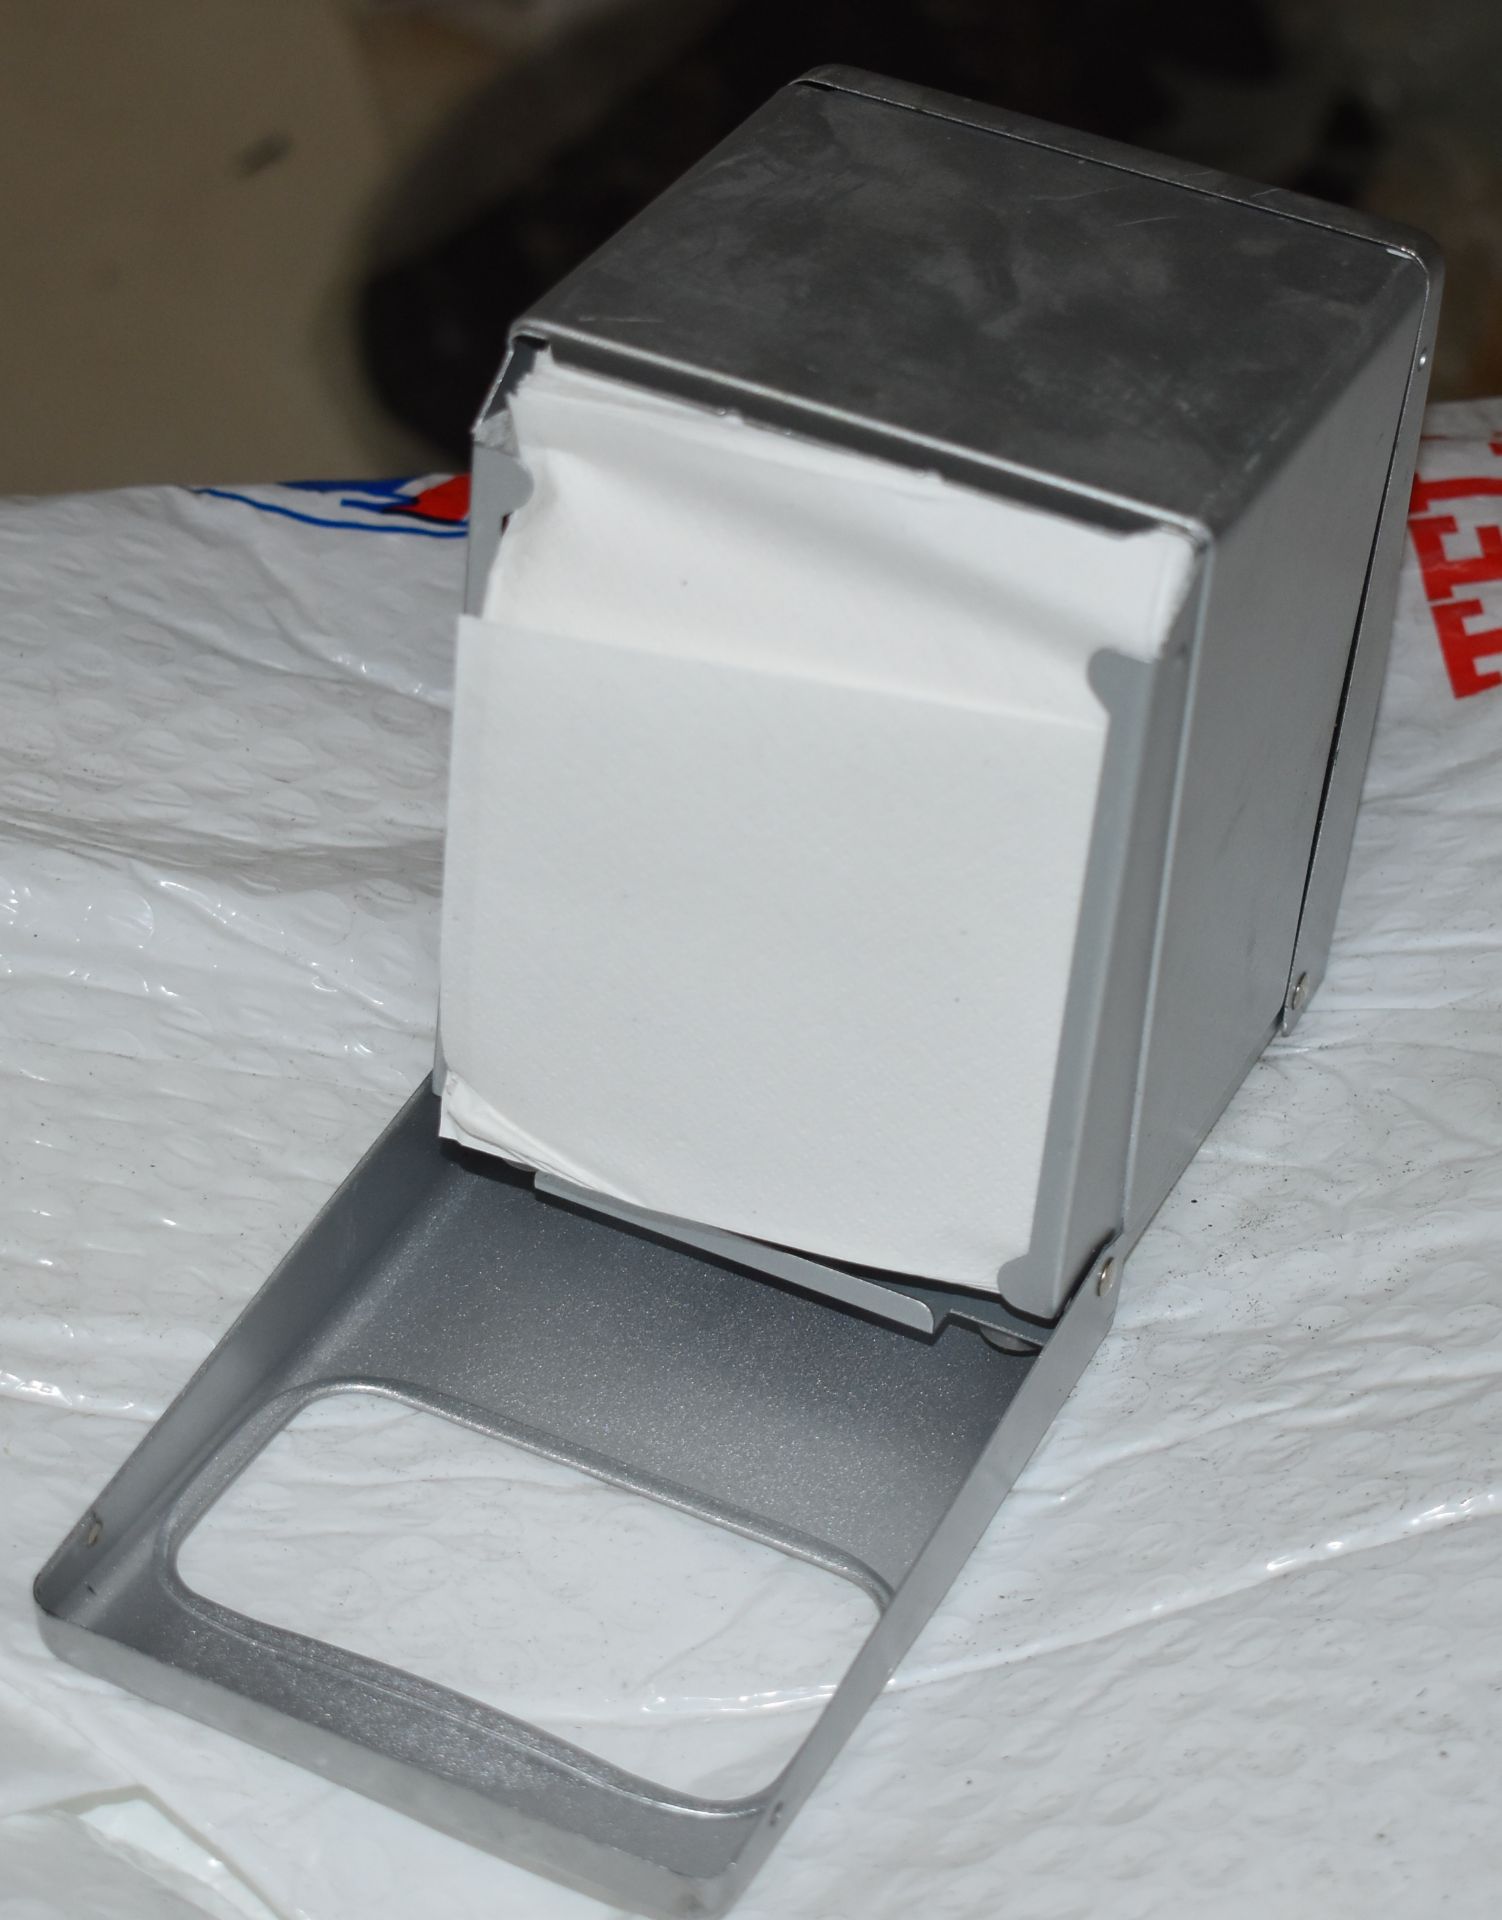 26 x Eds Diner Paper Towel Dispensers - CL431 - Ref102 - Location: Altrincham WA14 - Image 2 of 3